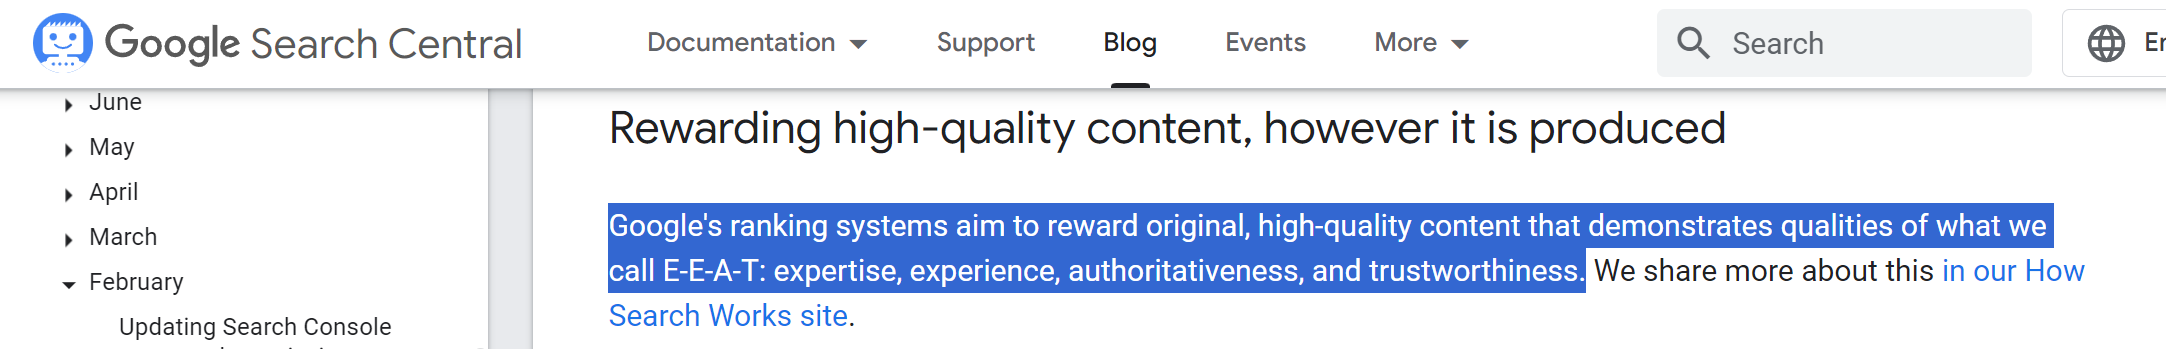 Google Search Central's guidelines reading "Google's ranking systems aim to reward original, high-quality content that demonstrates qualities of what we call E-E-A-T: expertise, experience, authoritativeness, and trustworthiness."